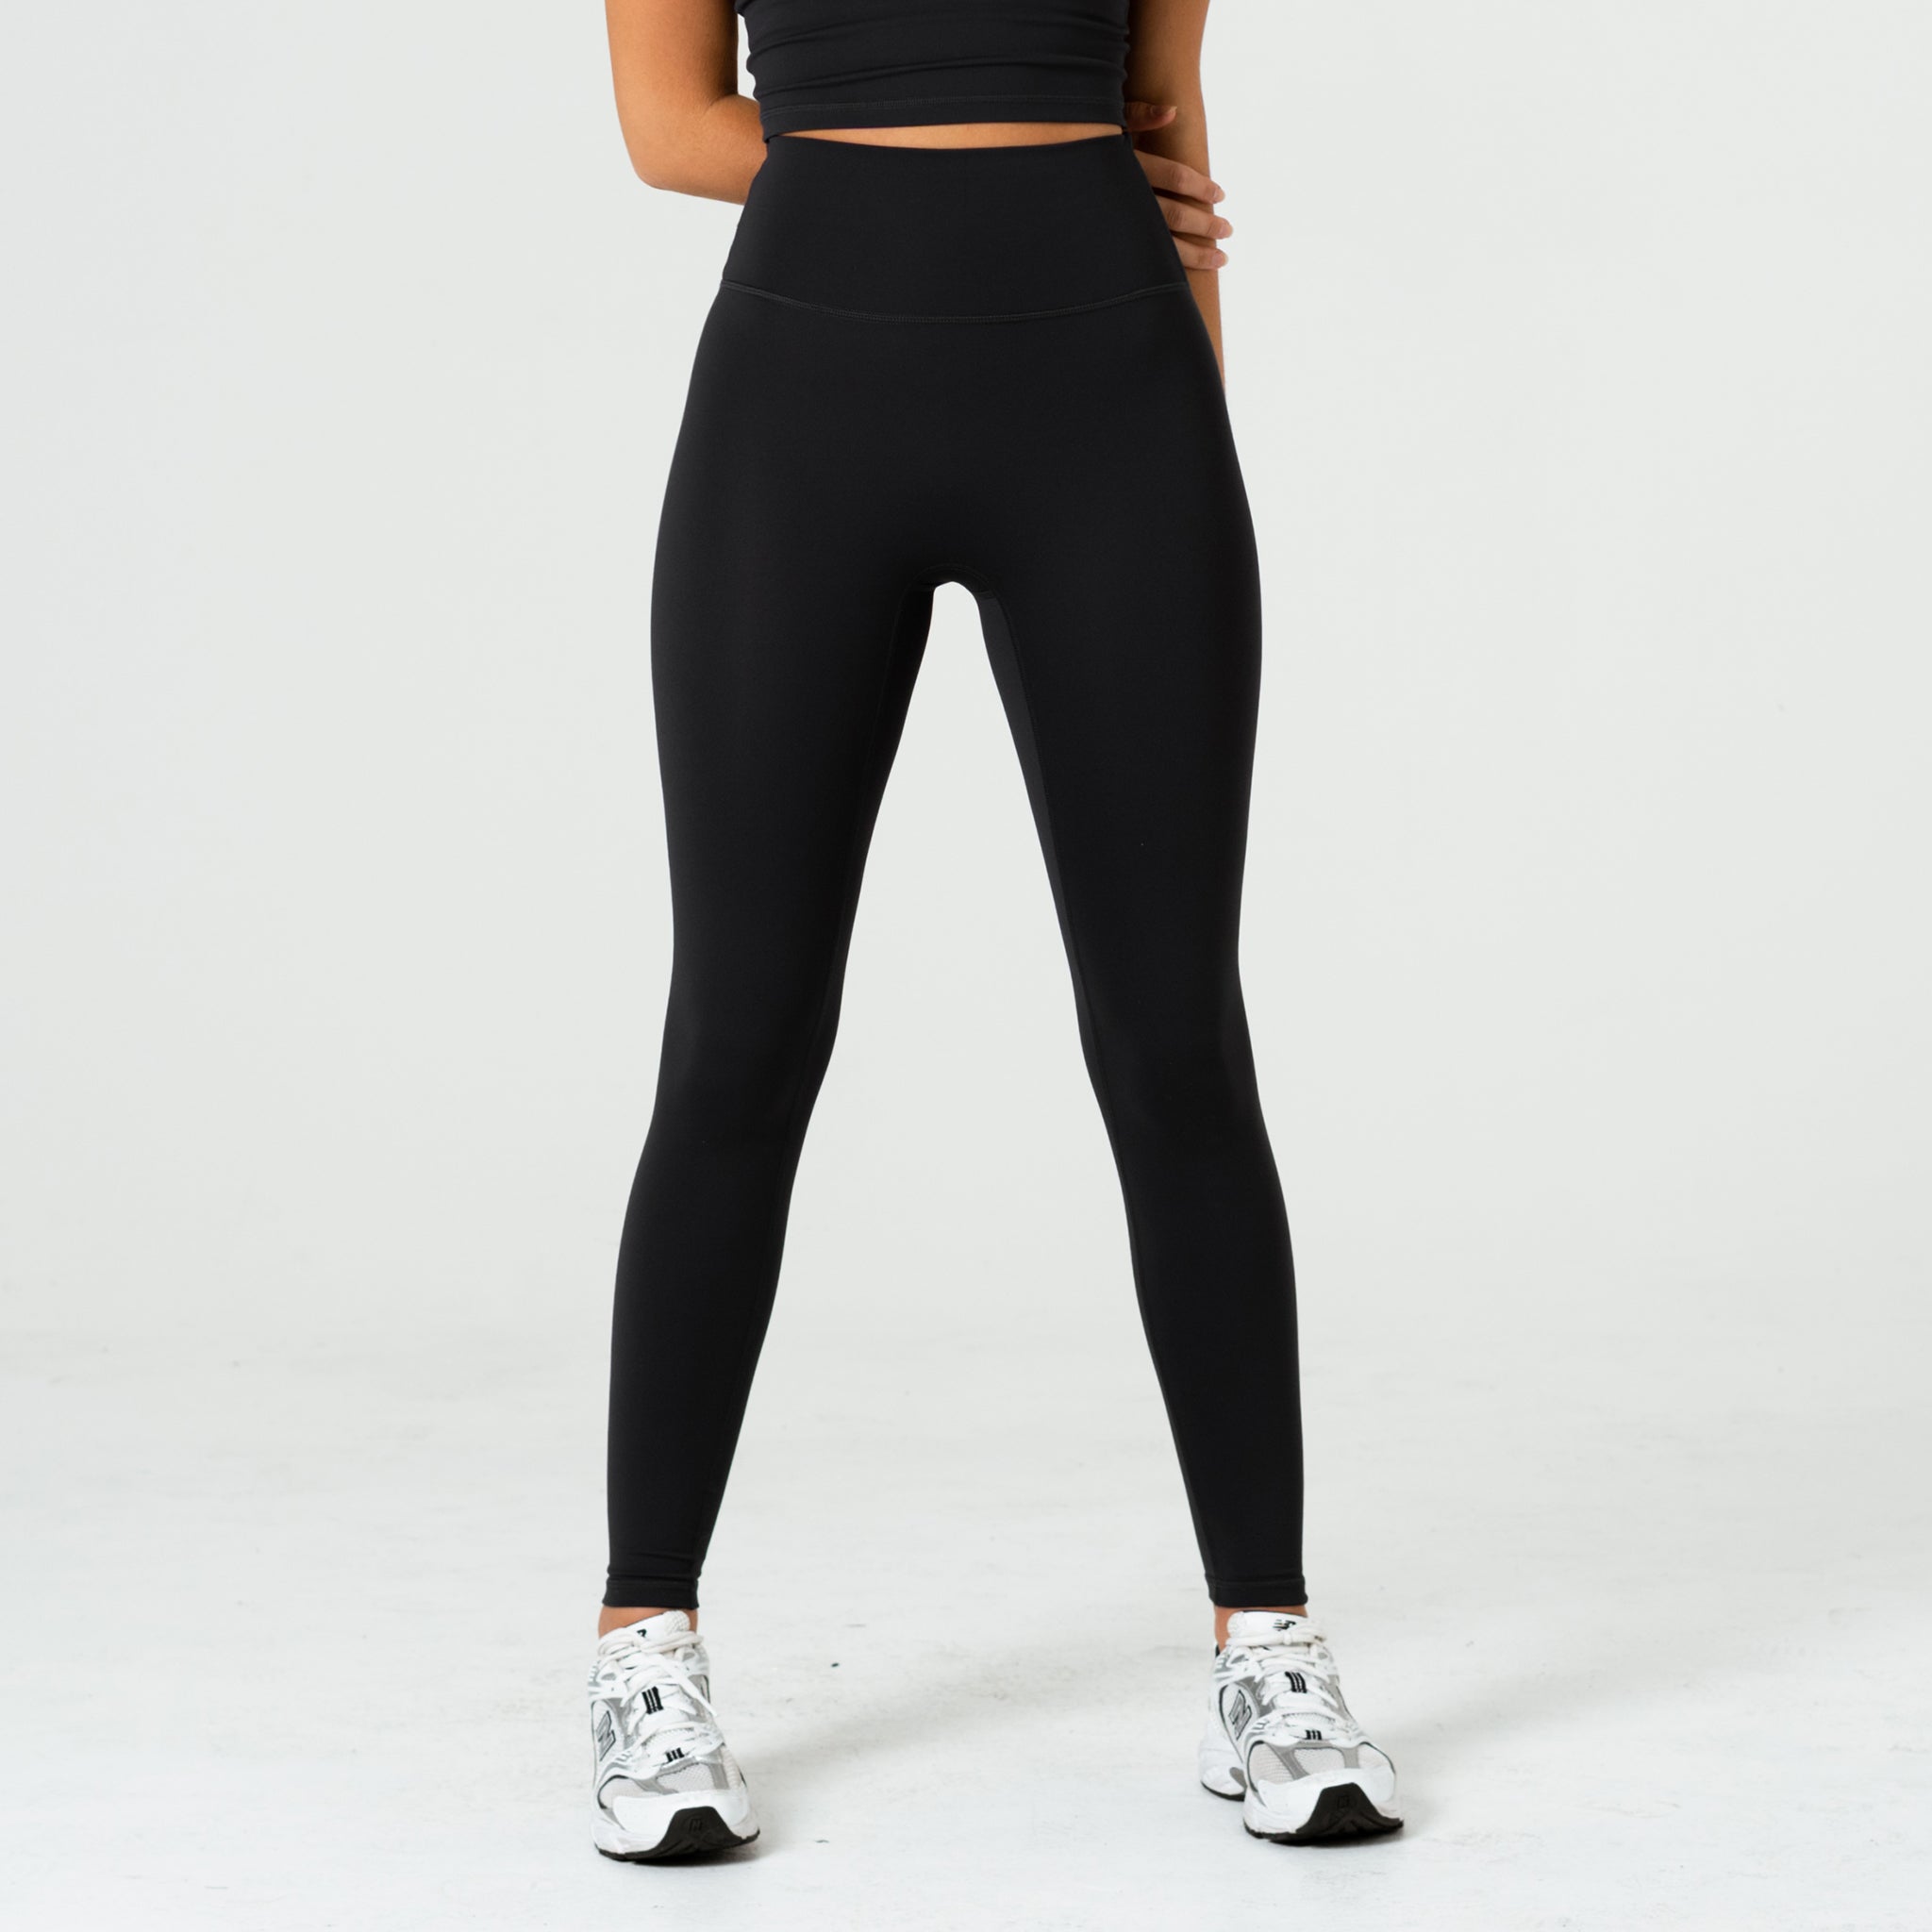 ONLY Women Solid Black Jeggings